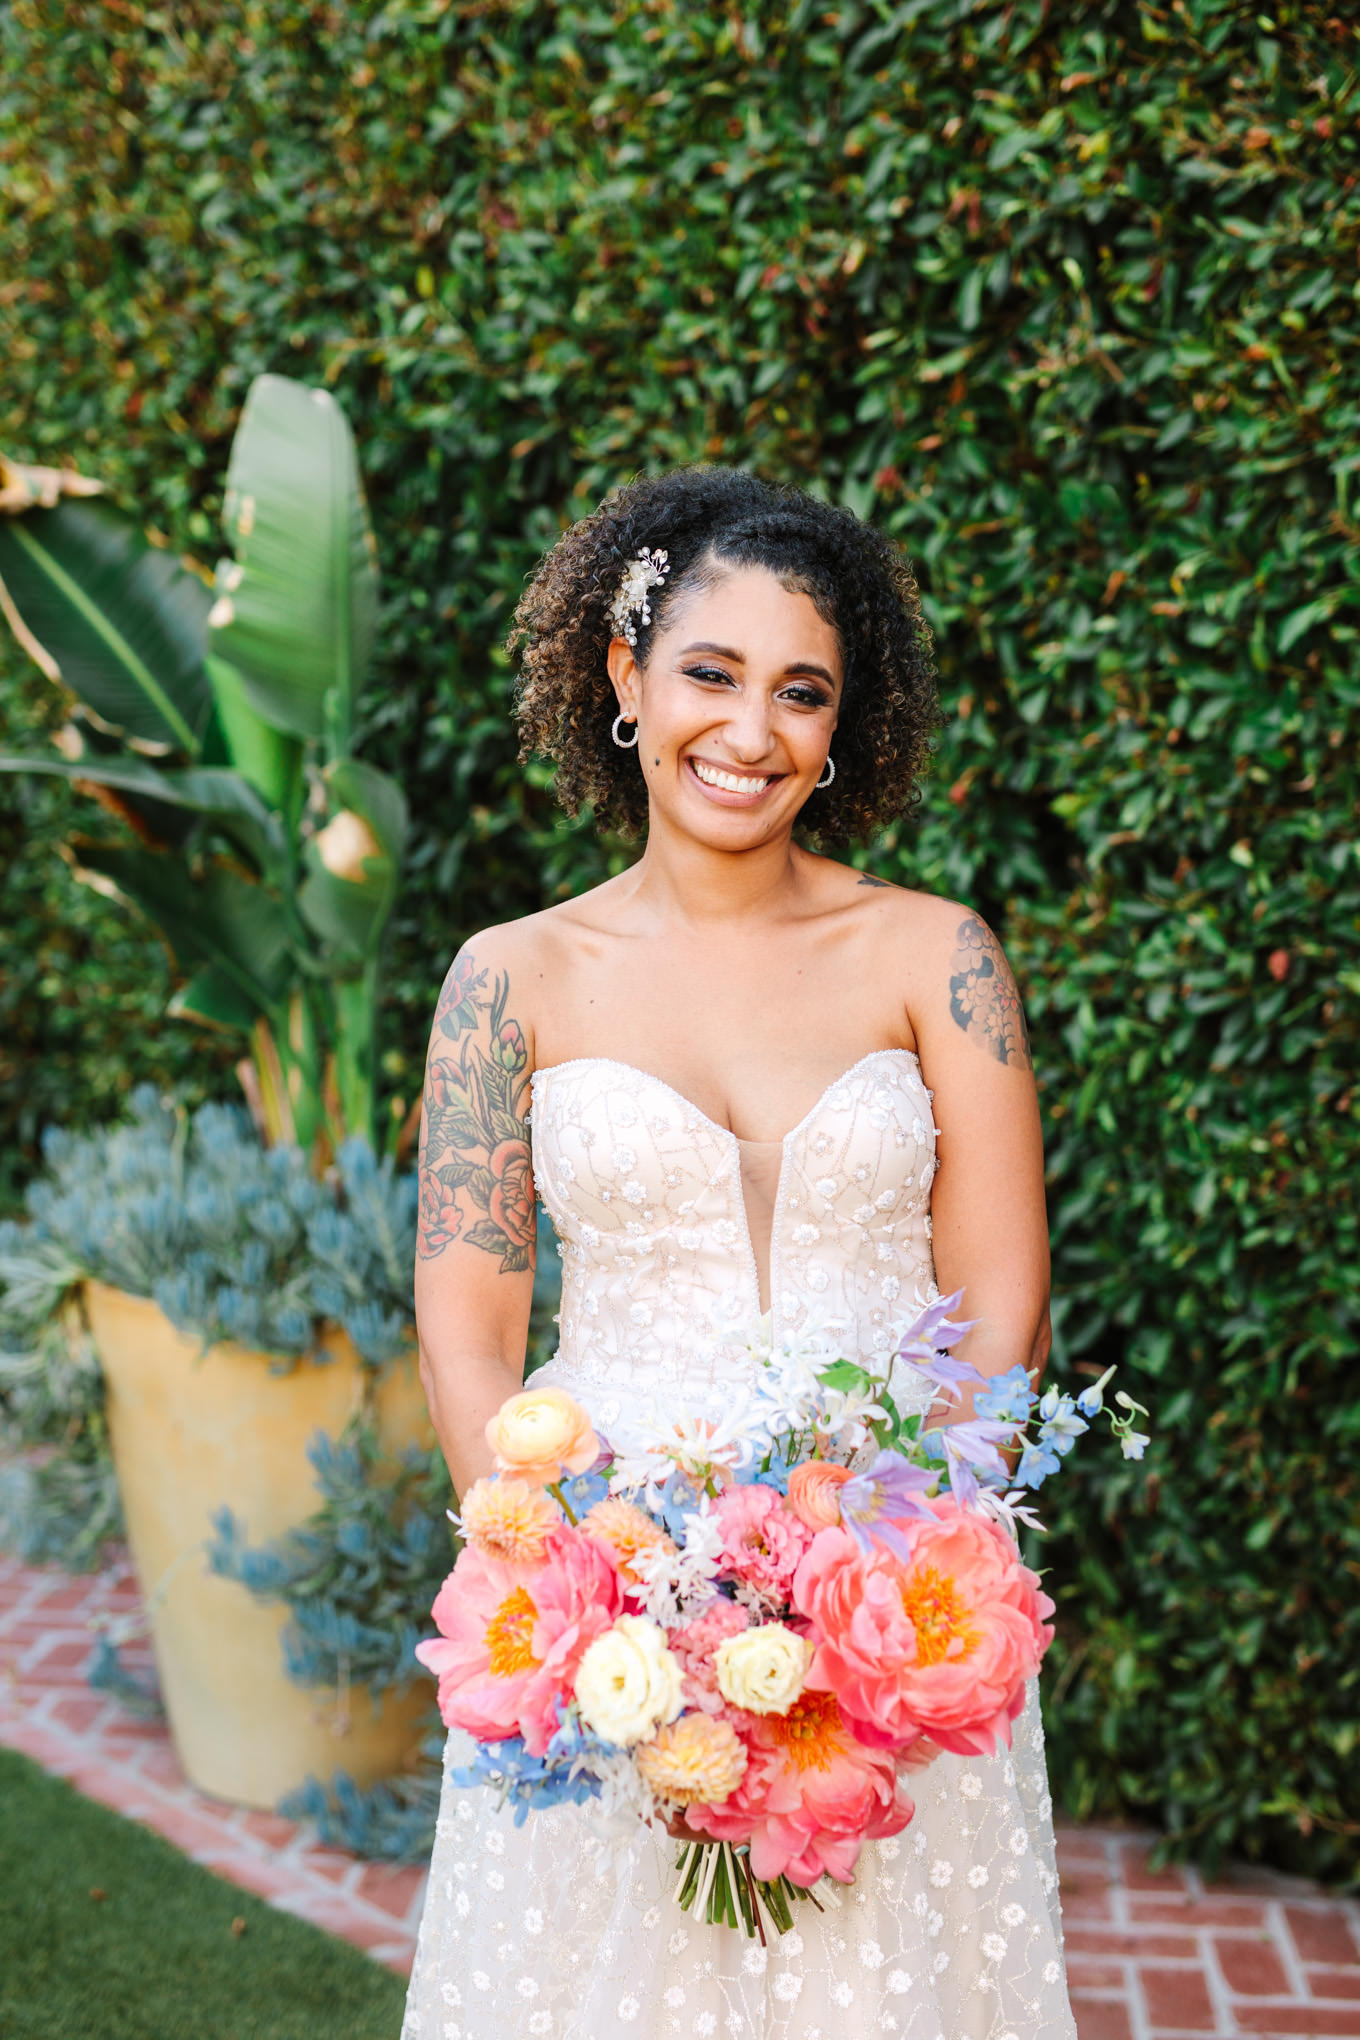 Happy bride in Pronovias gown | Colorful pop-up micro wedding at The Ruby Street Los Angeles featured on Green Wedding Shoes | Colorful and elevated photography for fun-loving couples in Southern California | #colorfulwedding #popupwedding #weddingphotography #microwedding Source: Mary Costa Photography | Los Angeles